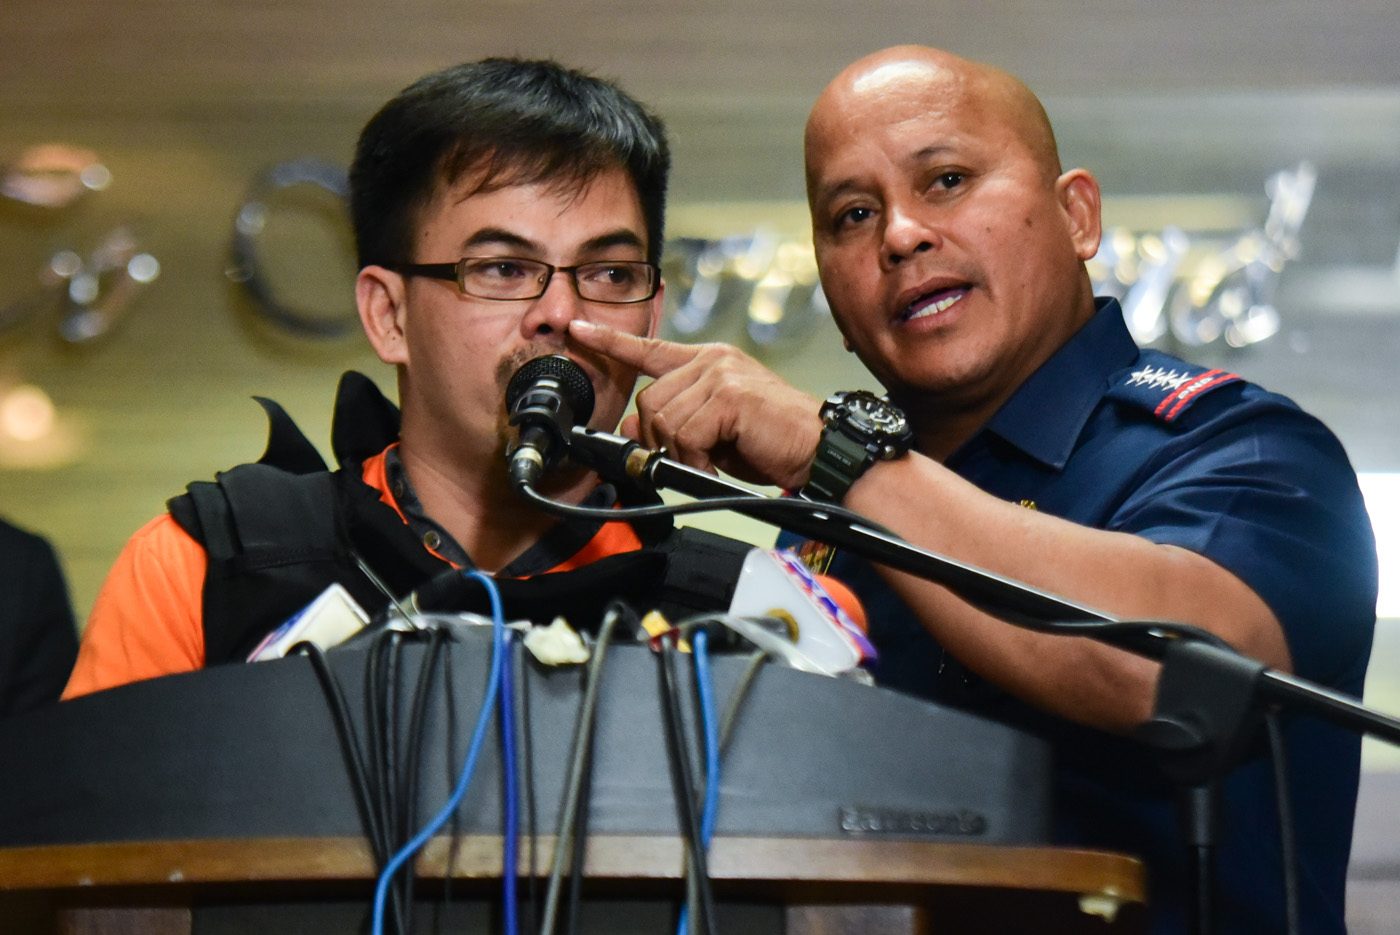 PRIMARY CASE. PNP chief Ronald dela Rosa presents alleged drug lord Kerwin Espinosa after arriving in the Philippines from Abu Dhabi at Camp Crame on November 18, 2016. File photo by Alecs Ongcal/Rappler  